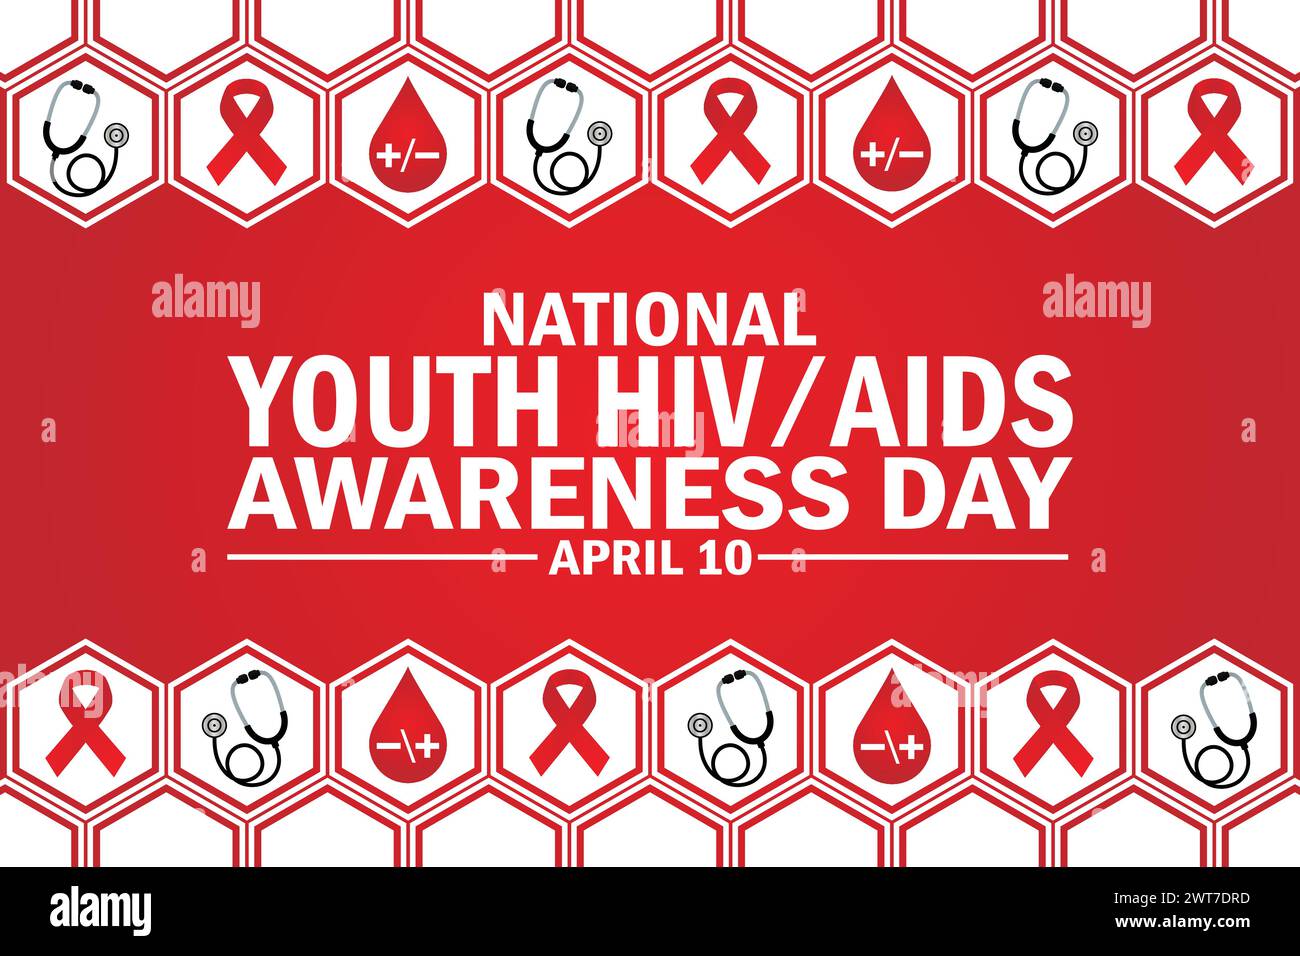 National Youth Hiv  Aids Awareness Day wallpaper with shapes and typography. National Youth Hiv  Aids Awareness Day, background Stock Vector